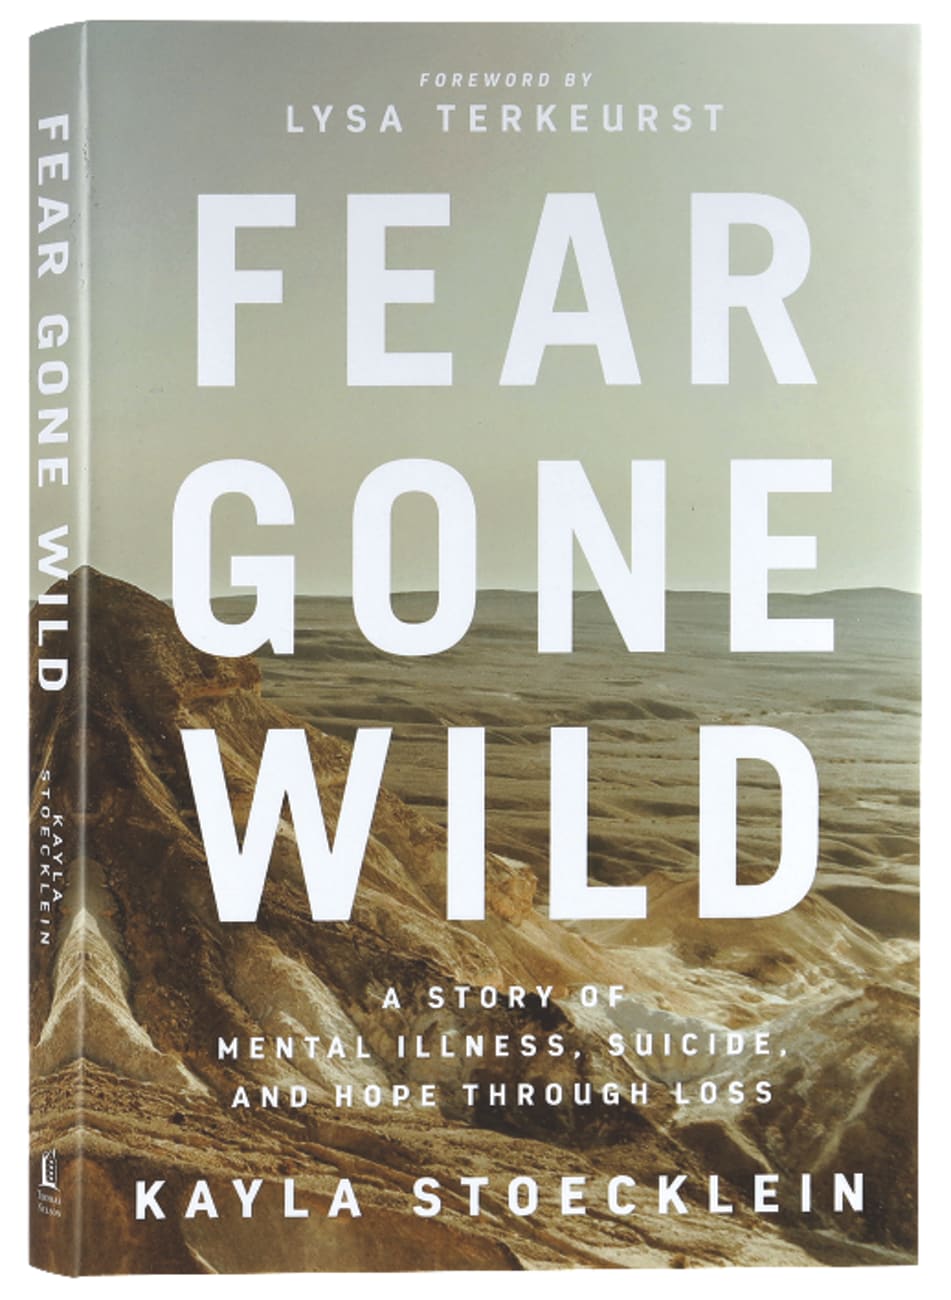 Fear Gone Wild: A Story of Mental Illness, Suicide, and Hope Through Loss Hardback